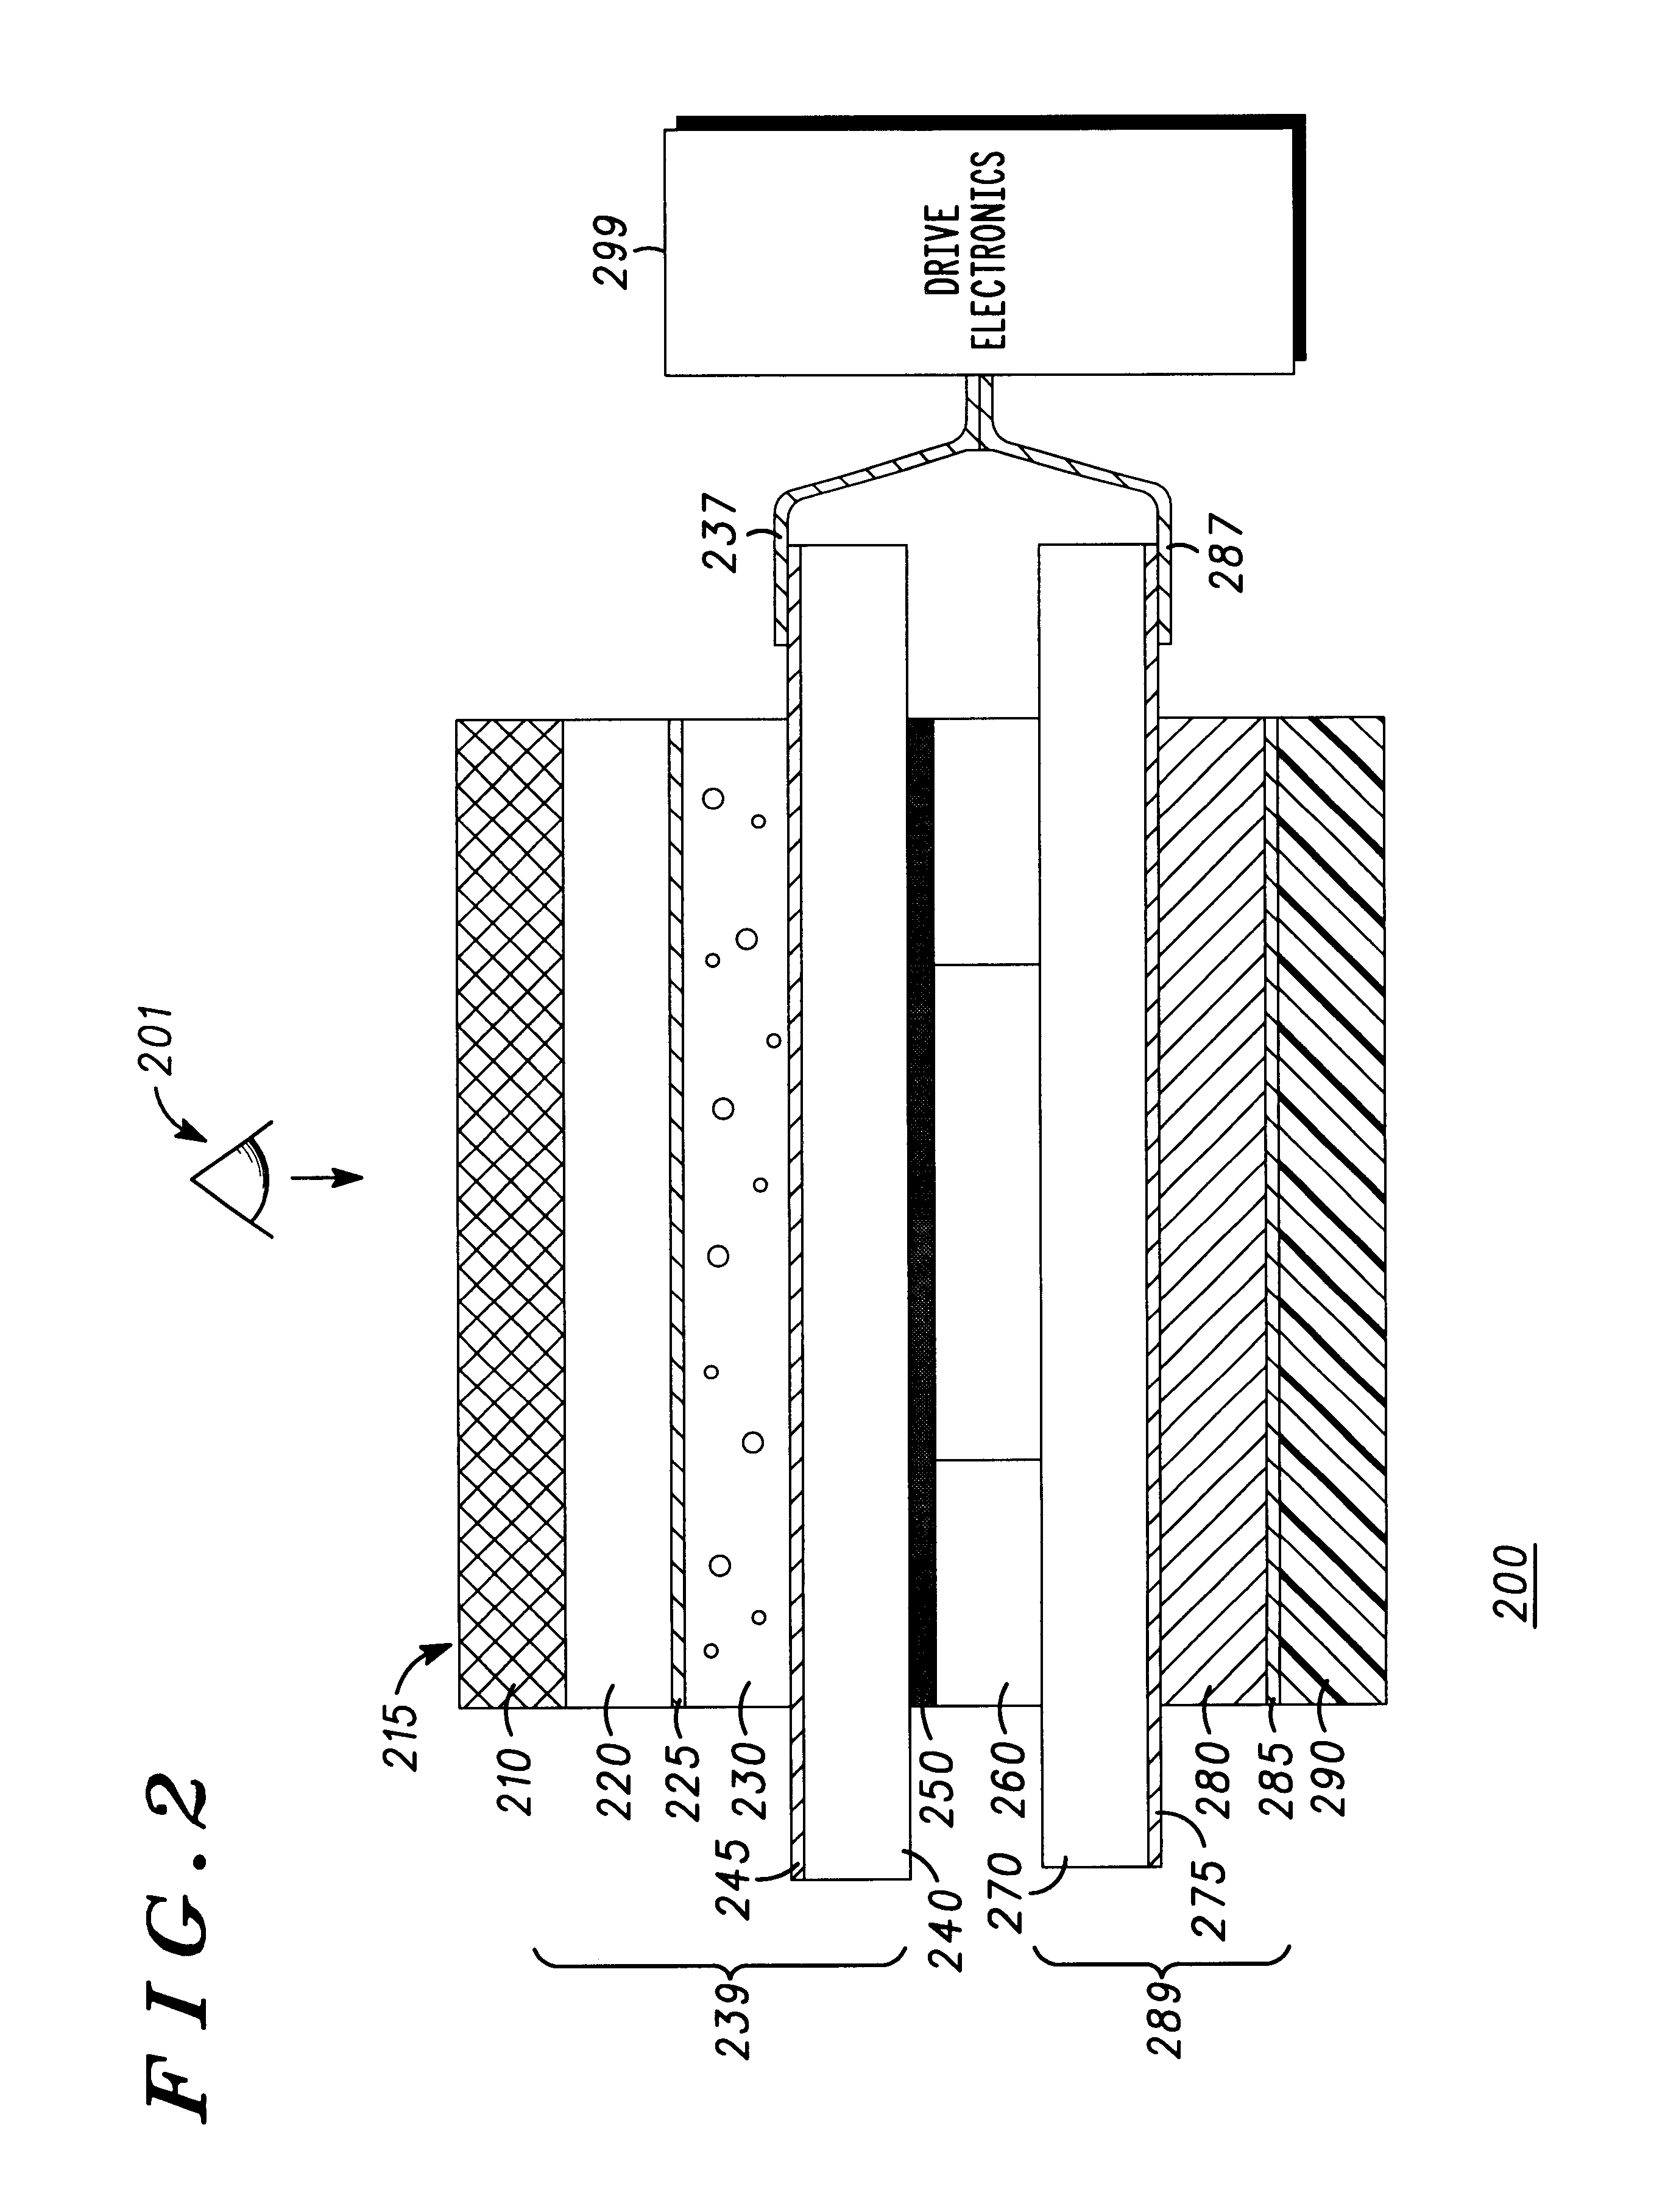 Display with aligned optical shutter and backlight cells applicable for use with a touchscreen